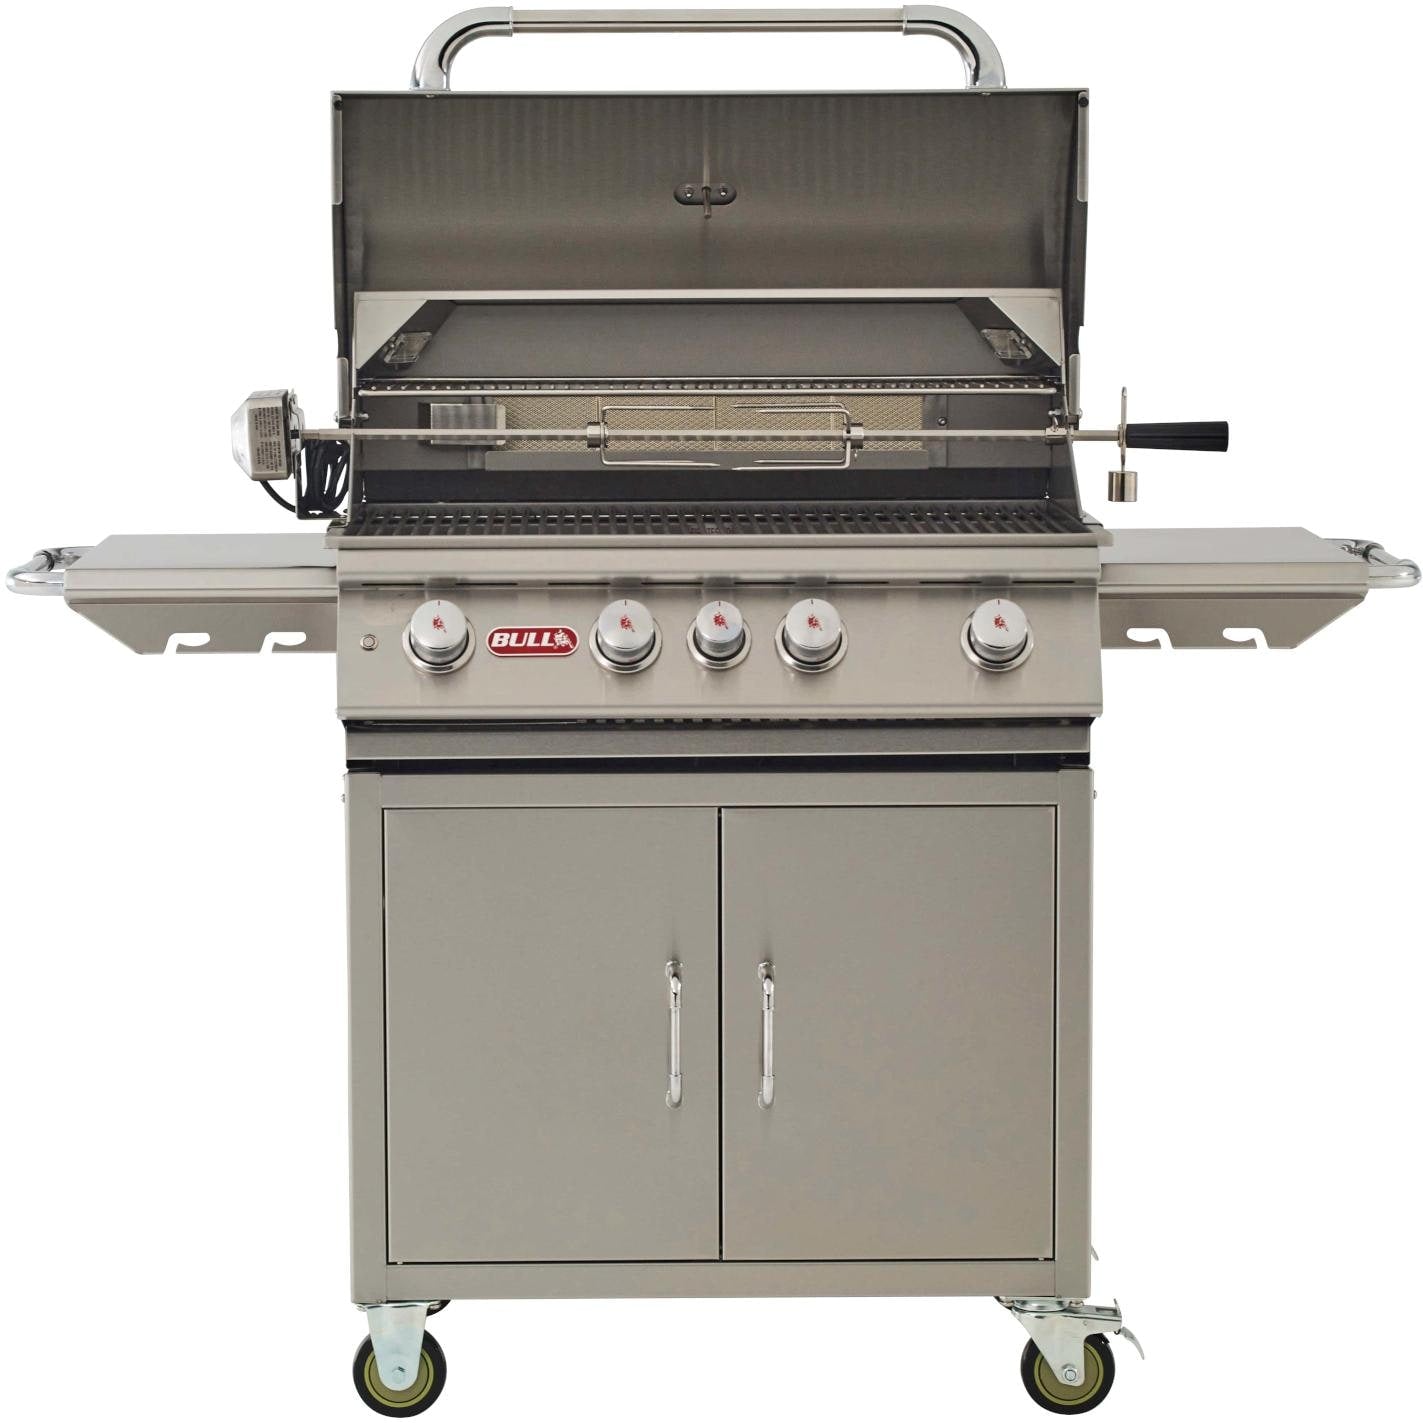 Bull Grills - 30-Inch 4-Burner Freestanding Propane OR Natural Gas Grill with Rear Infrared Burner